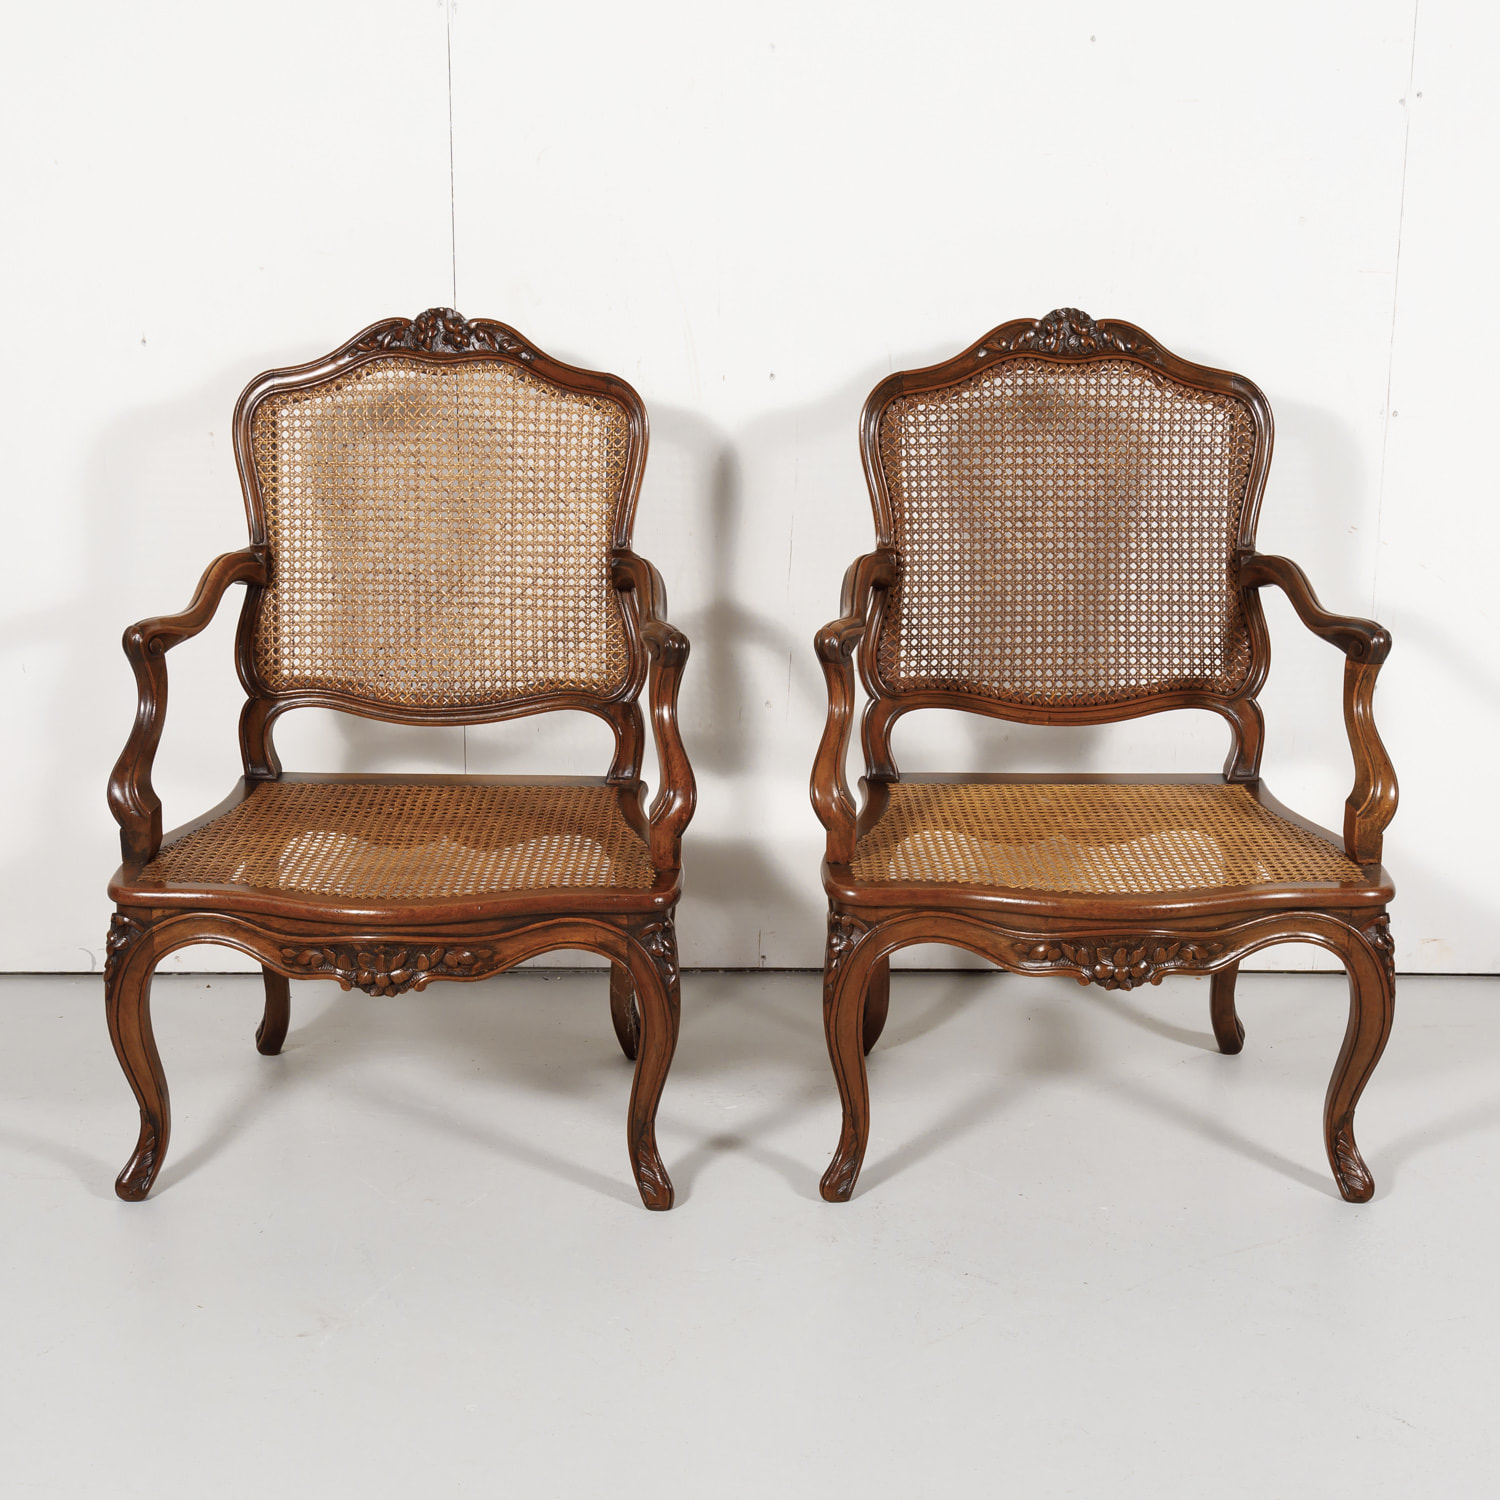 SOLD: French Louis XV Style 19th Century Walnut Armchair with New